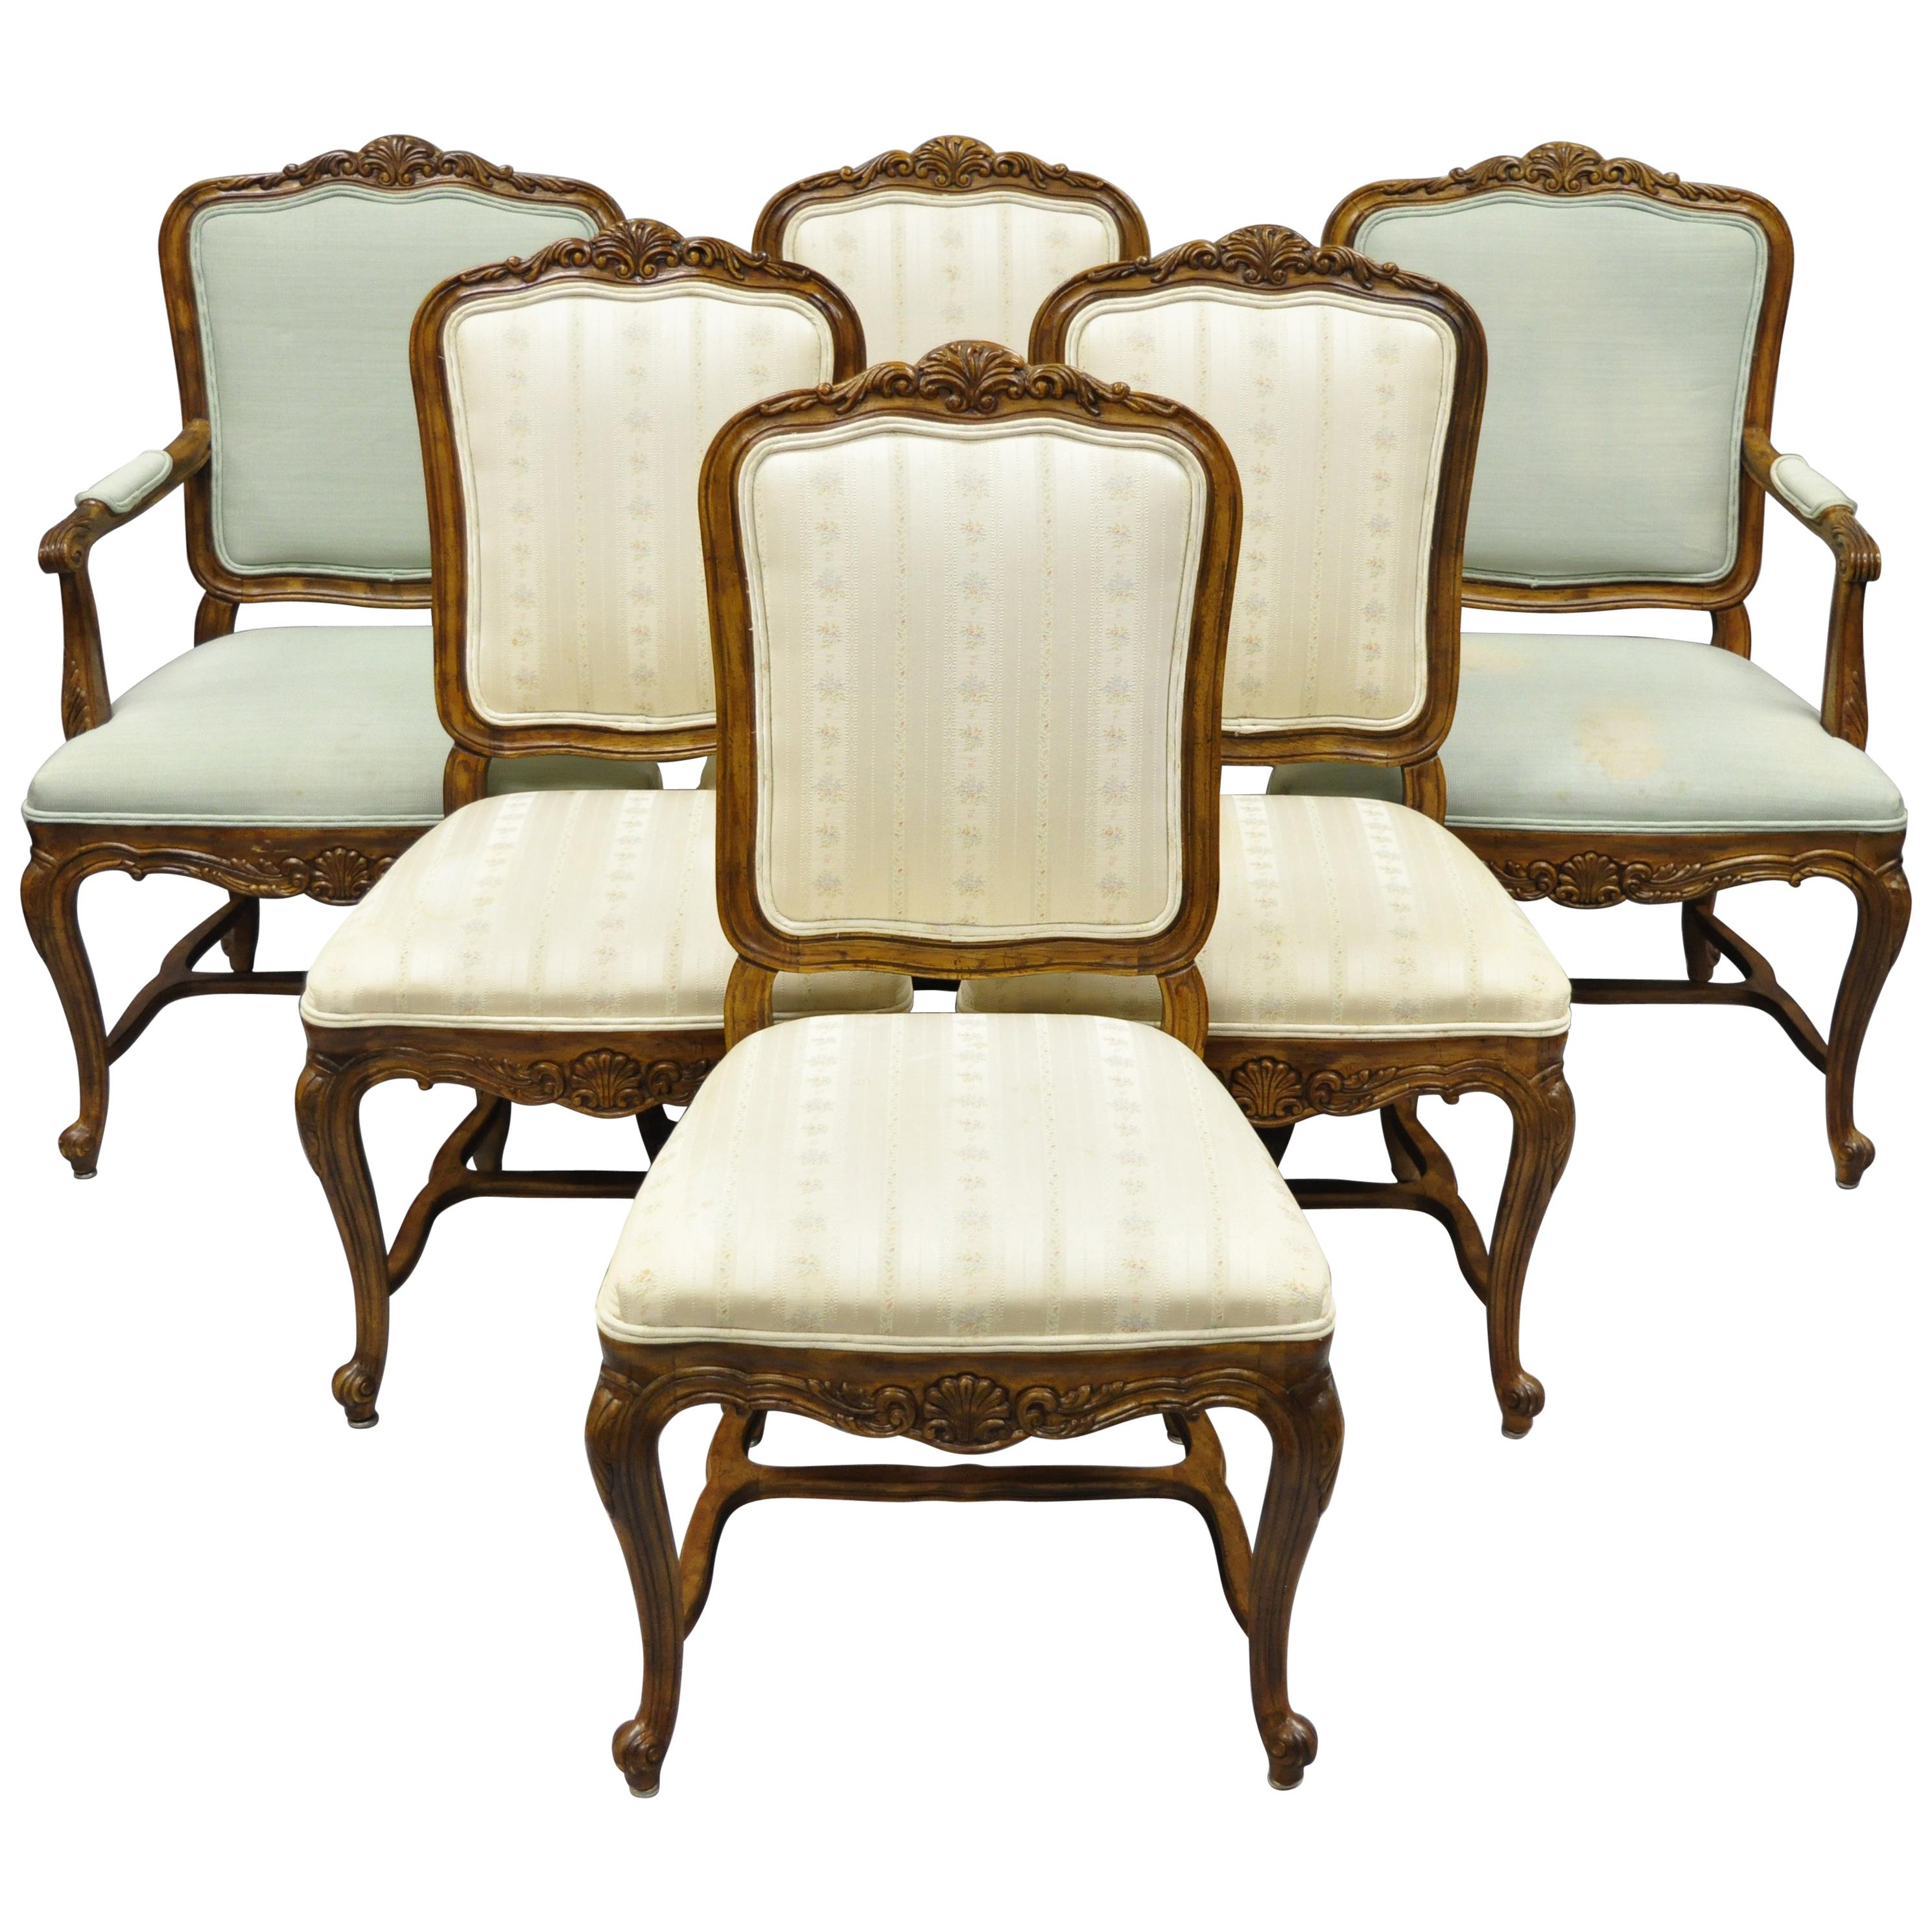 6 Drexel Heritage Old Continent French Provincial Louis XV Style Dining Chairs